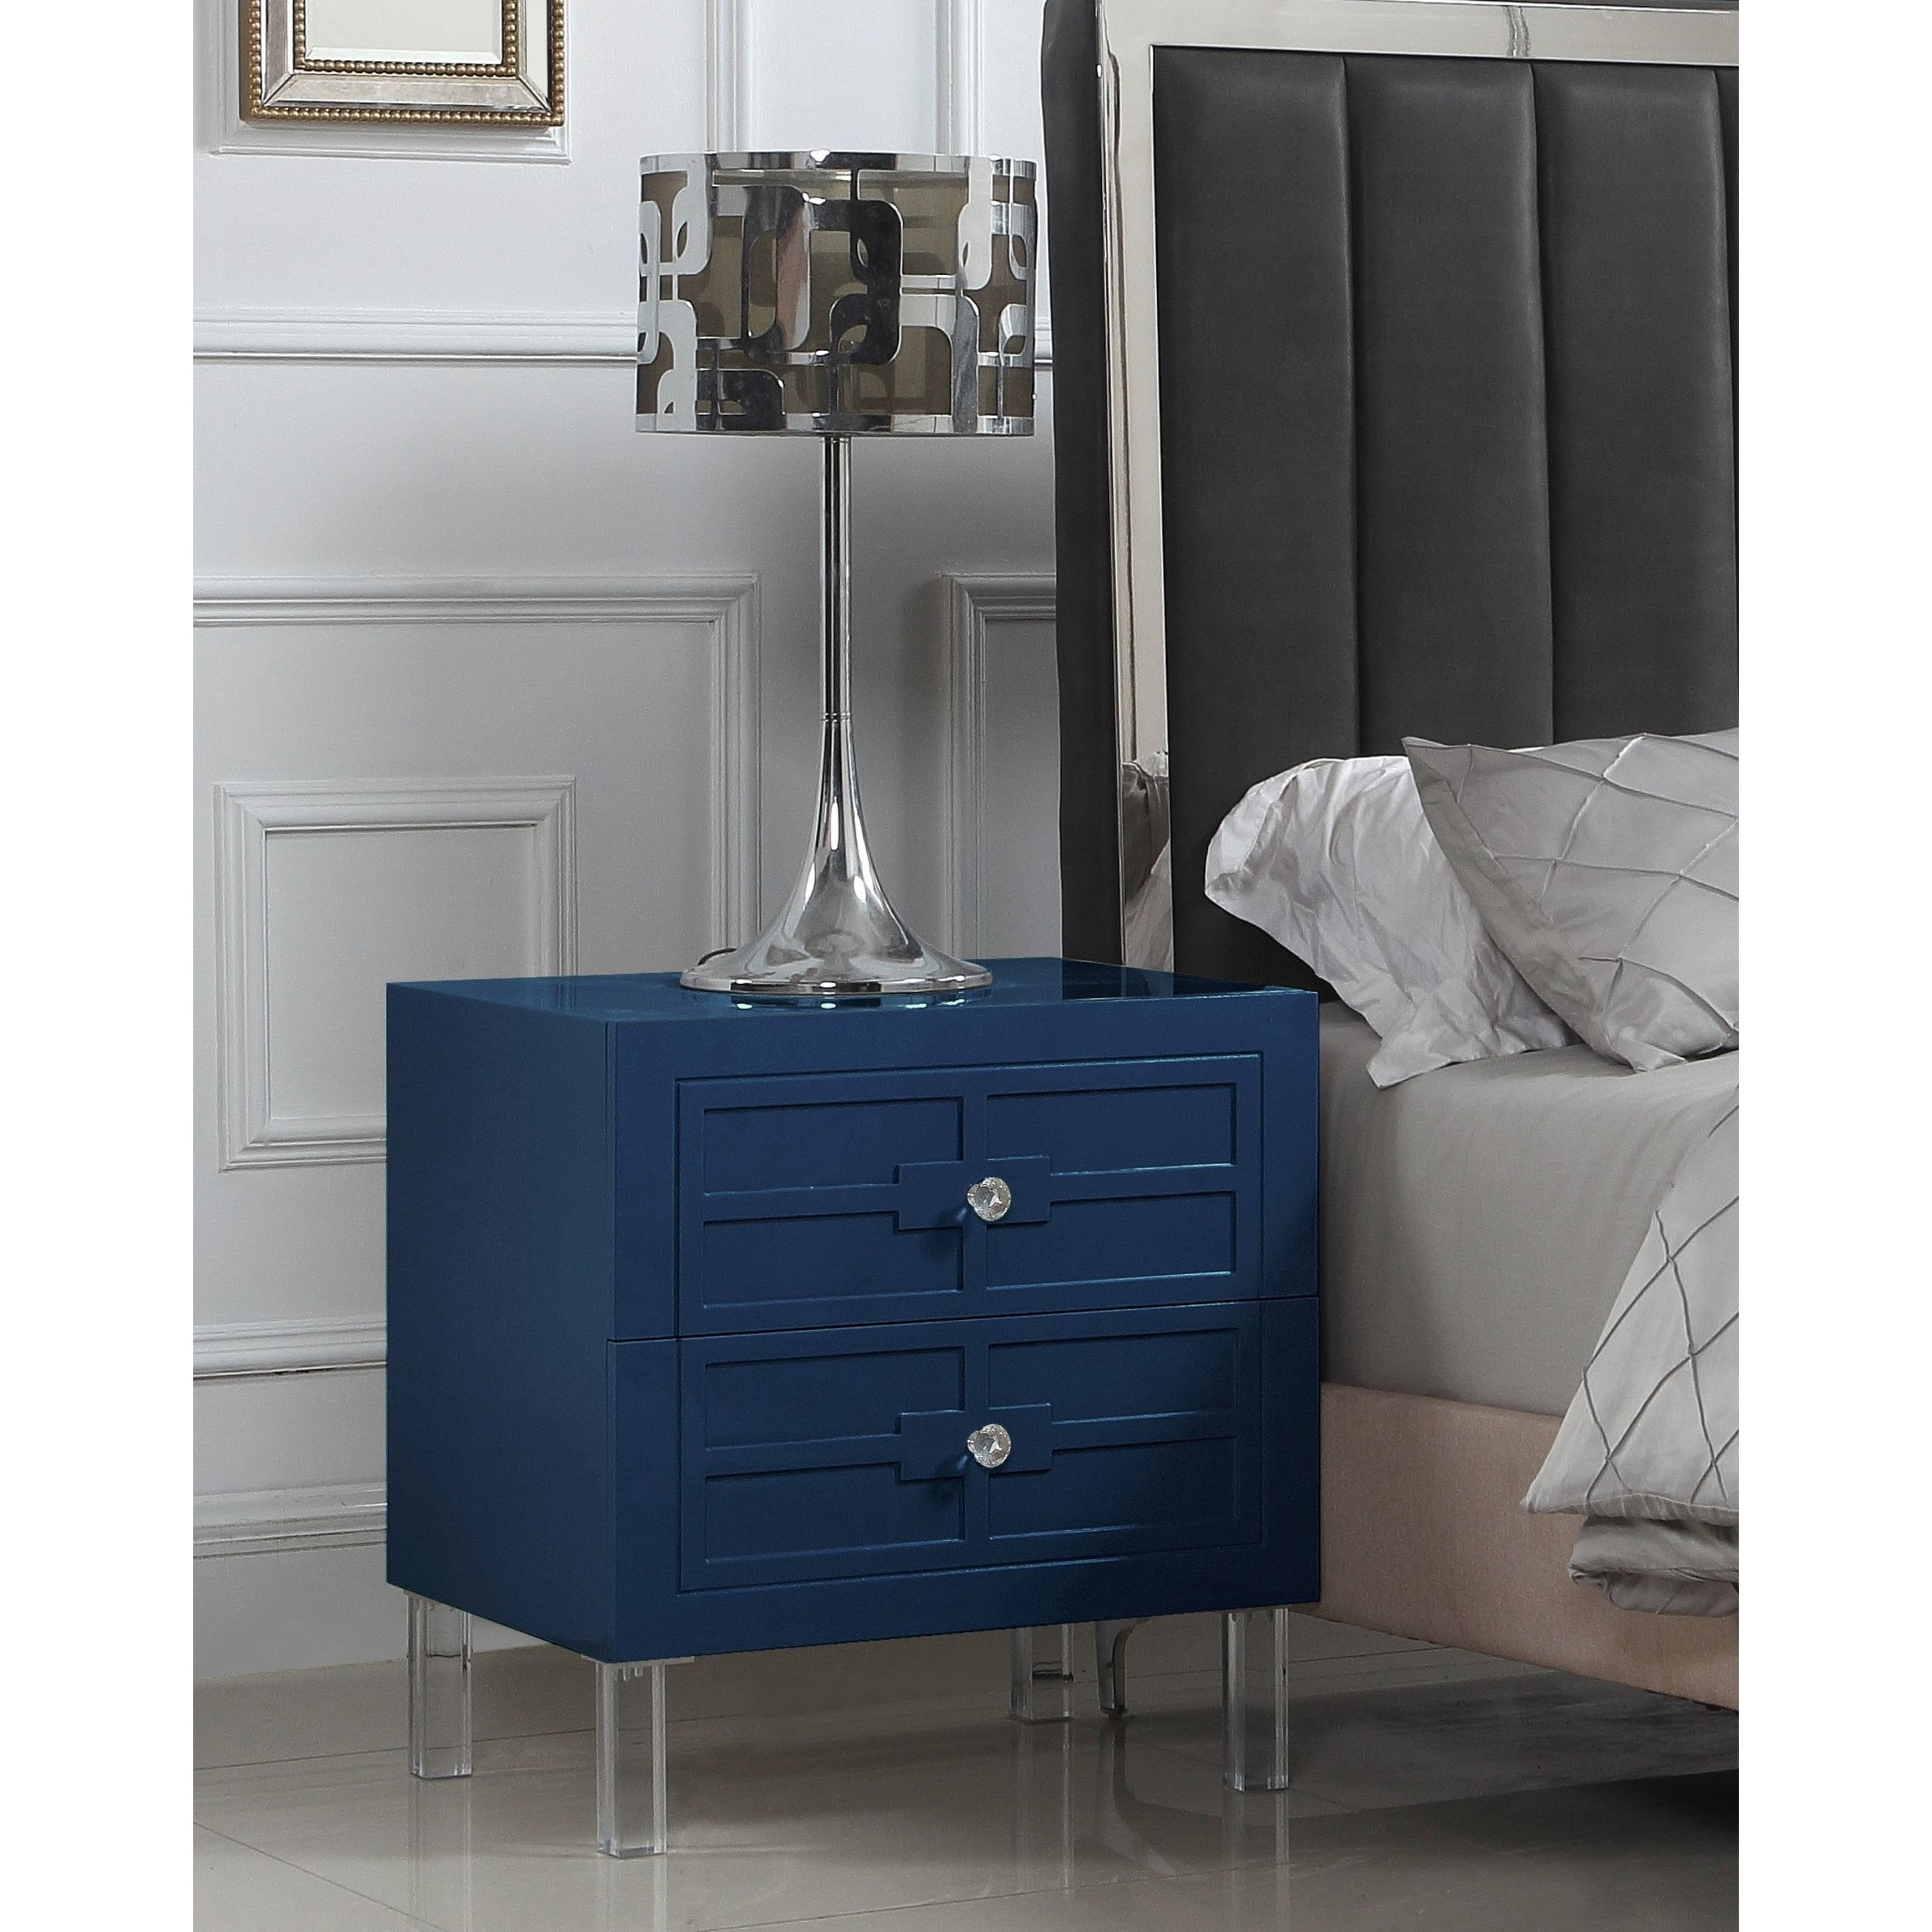 https://ak1.ostkcdn.com/images/products/17825211/Chic-Home-Lucca-Nightstand-Side-Table-With-Soft-closing-Drawers-9a3fe7db-74f2-45b1-beda-555e45cd2cb5.jpg